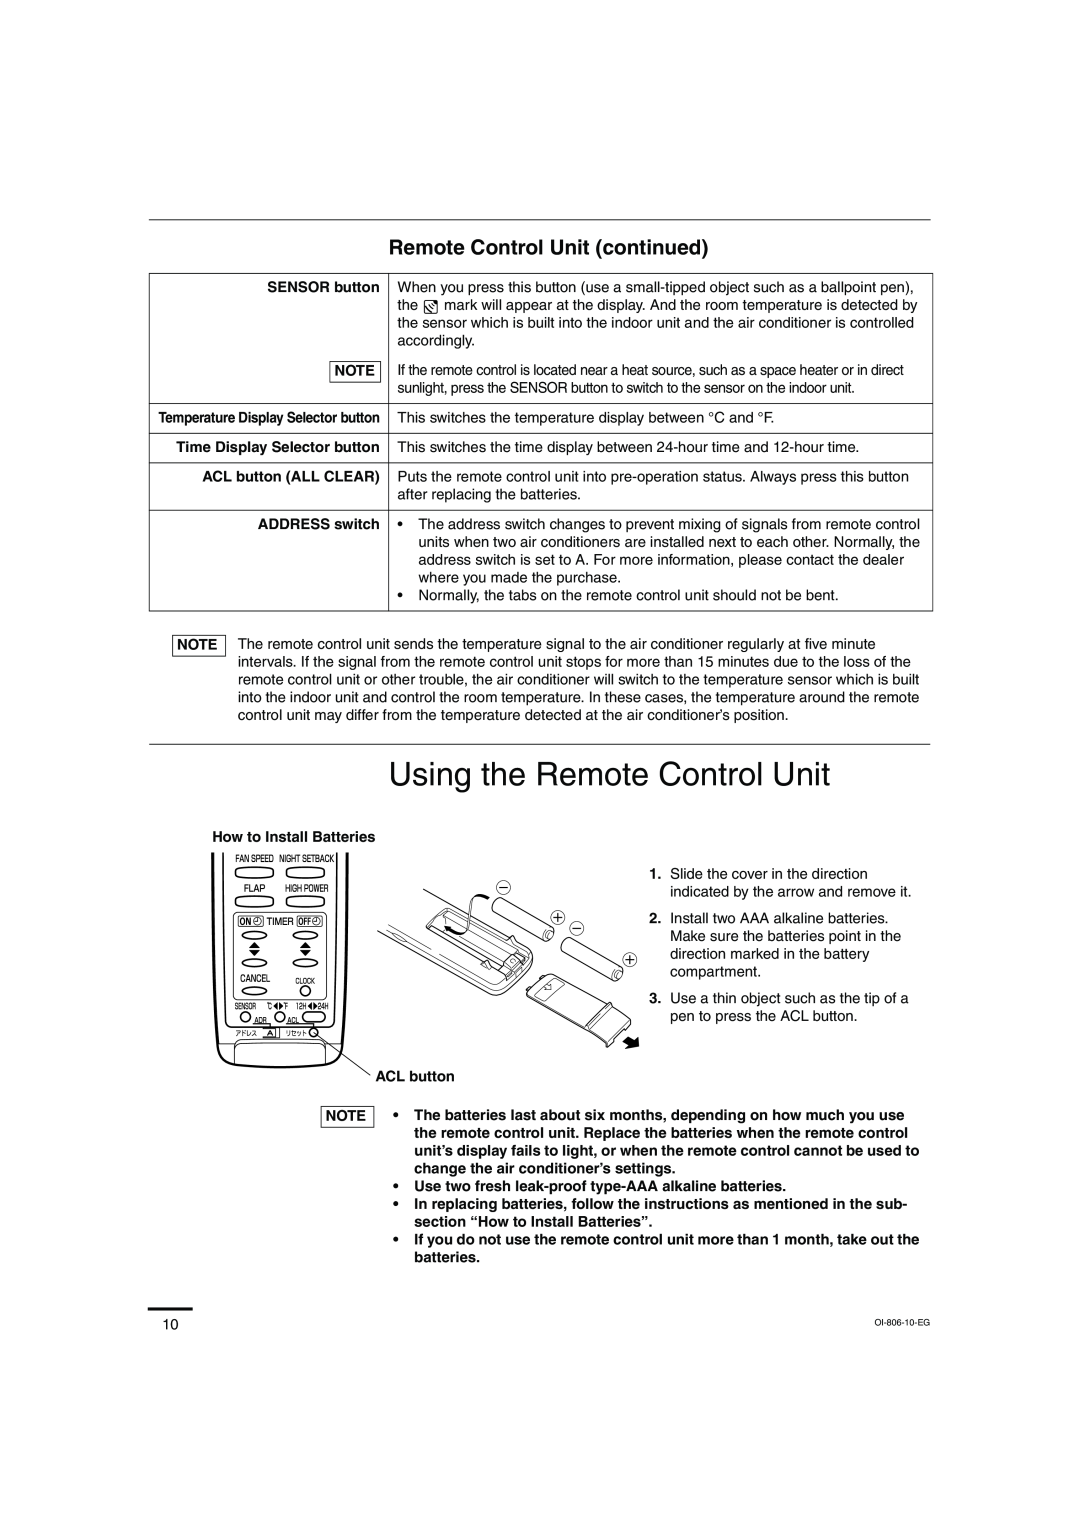 Sanyo KMS0972, KMS1272 instruction manual Using the Remote Control Unit, Remote Control Unit continued 